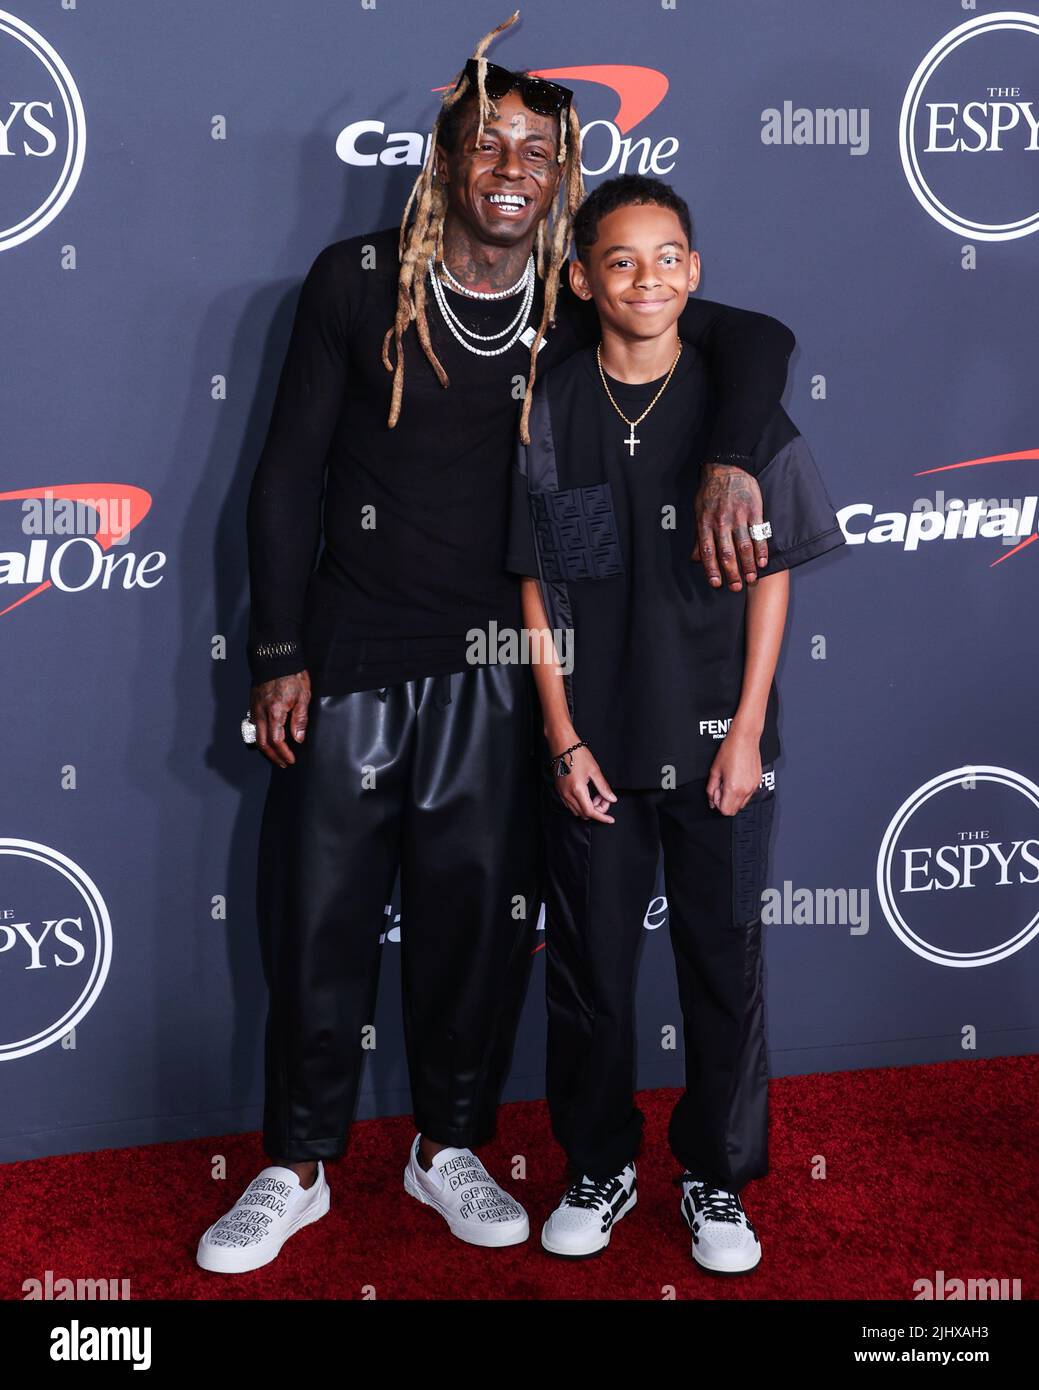 Hollywood, United States. 20th July, 2022. HOLLYWOOD, LOS ANGELES, CALIFORNIA, USA - JULY 20: American rapper Lil Wayne (Dwayne Michael Carter Jr.) and son Kameron Carter arrive at the 2022 ESPY Awards held at the Dolby Theatre on July 20, 2022 in Hollywood, Los Angeles, California, United States. (Photo by Xavier Collin/Image Press Agency) Credit: Image Press Agency/Alamy Live News Stock Photo